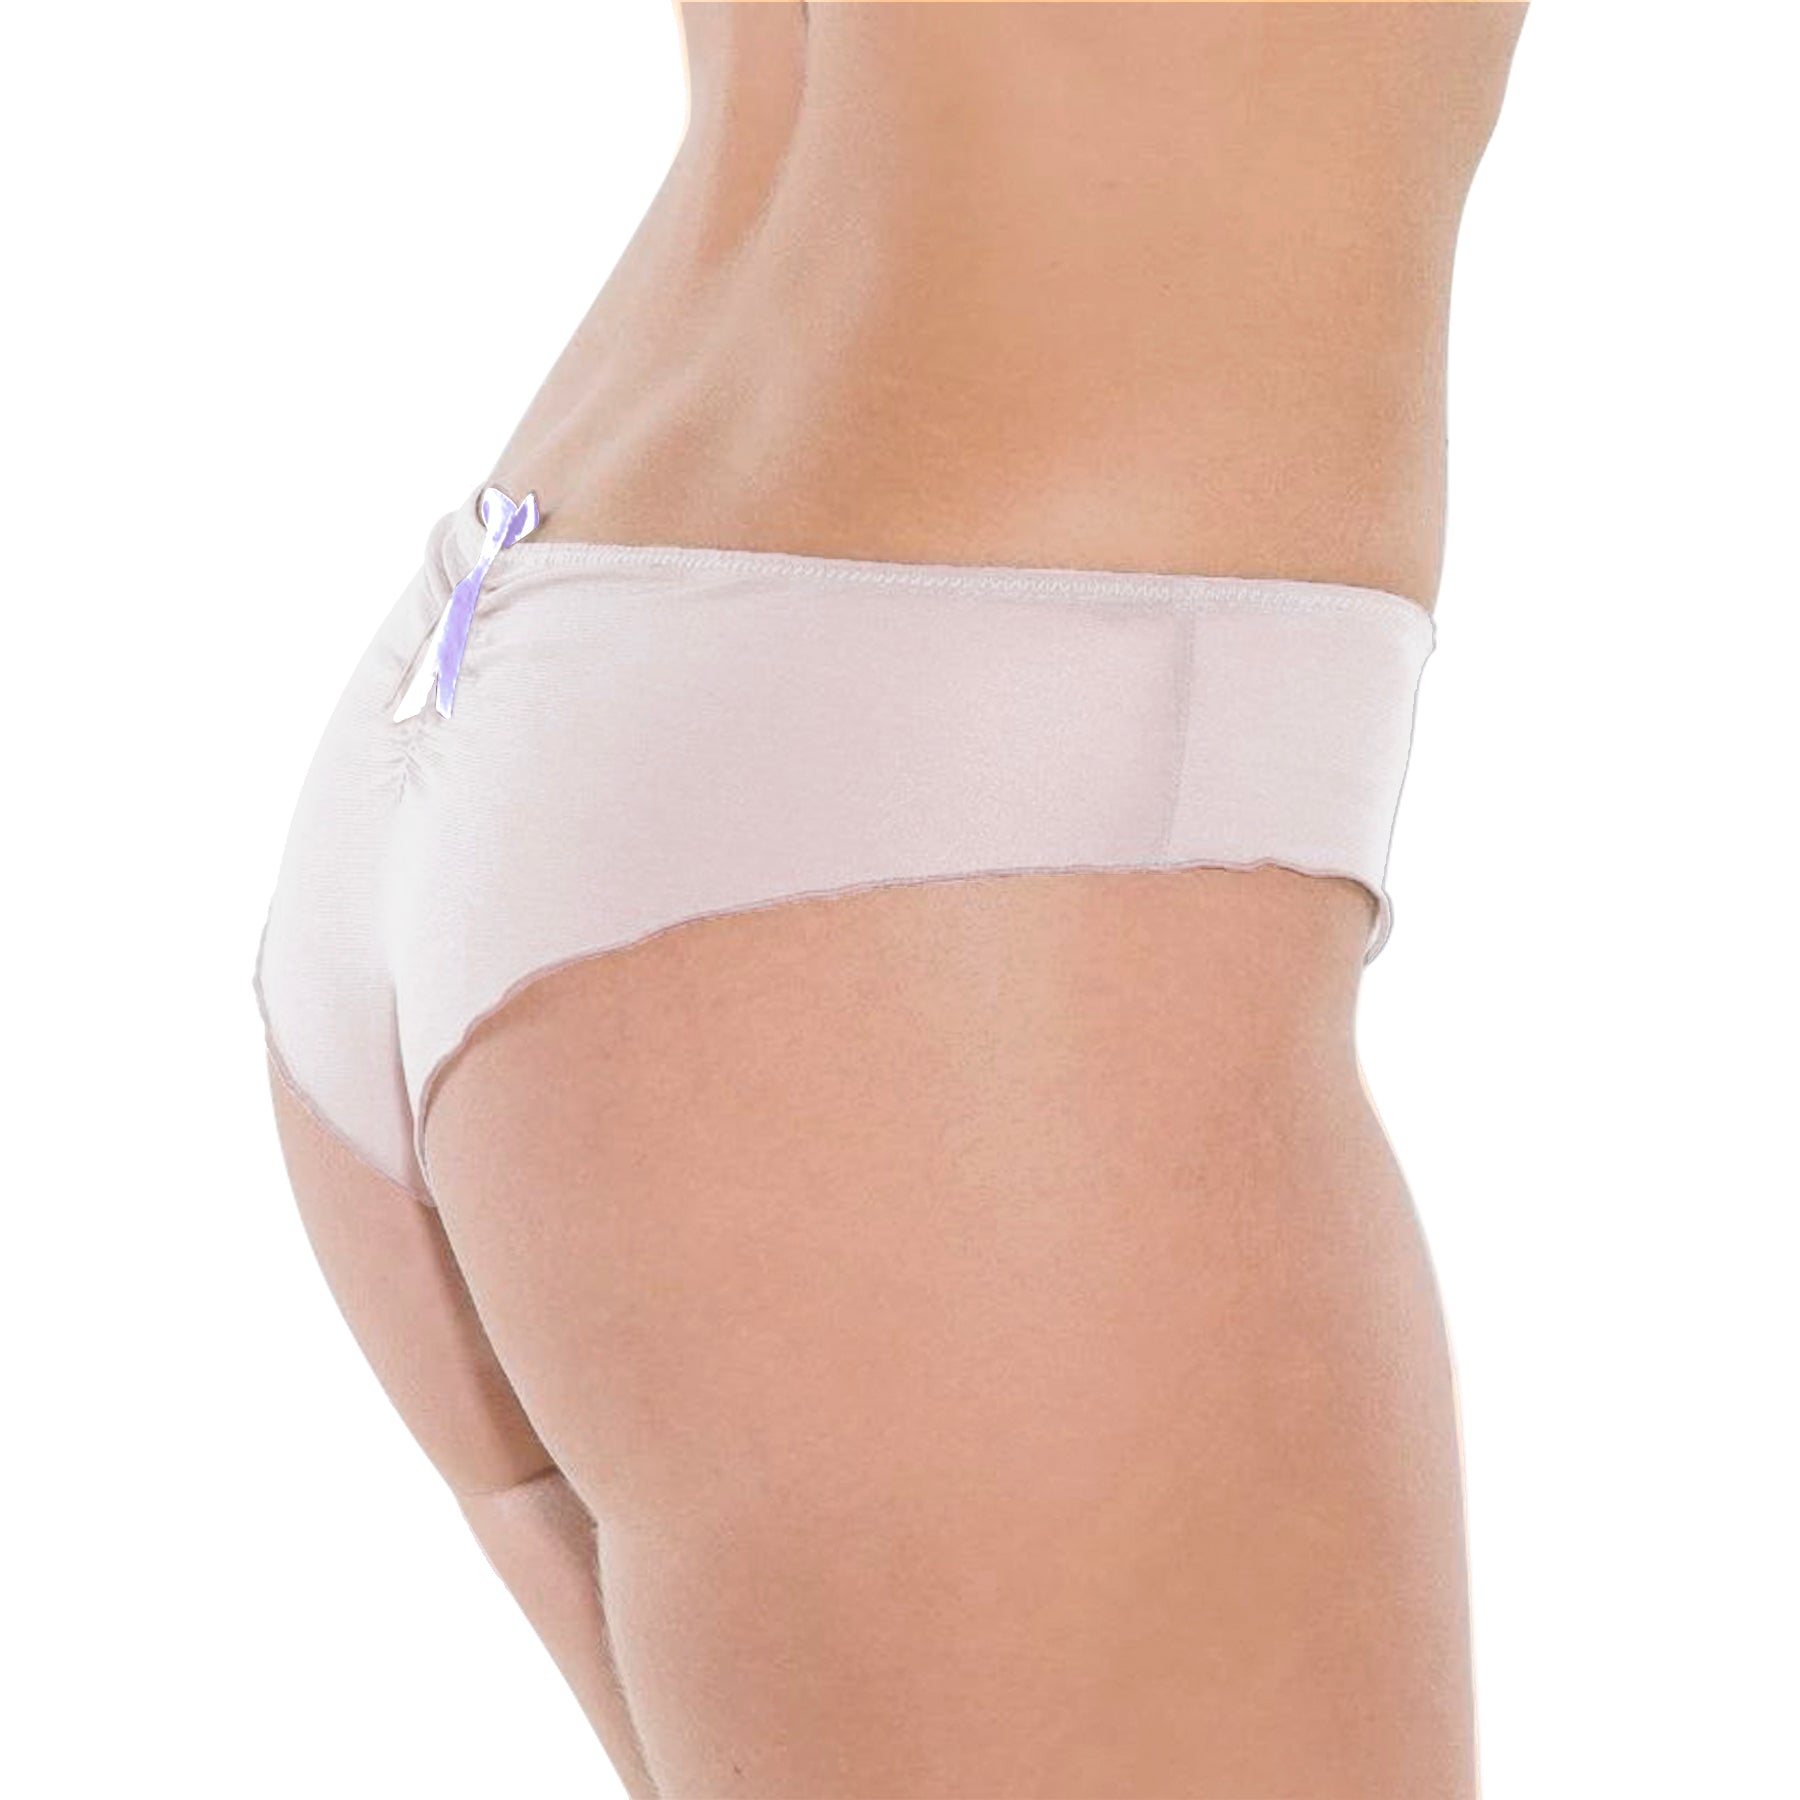 Fit Fully Yours Nicole Tanga U2275 Lavender/Orchid Rear View